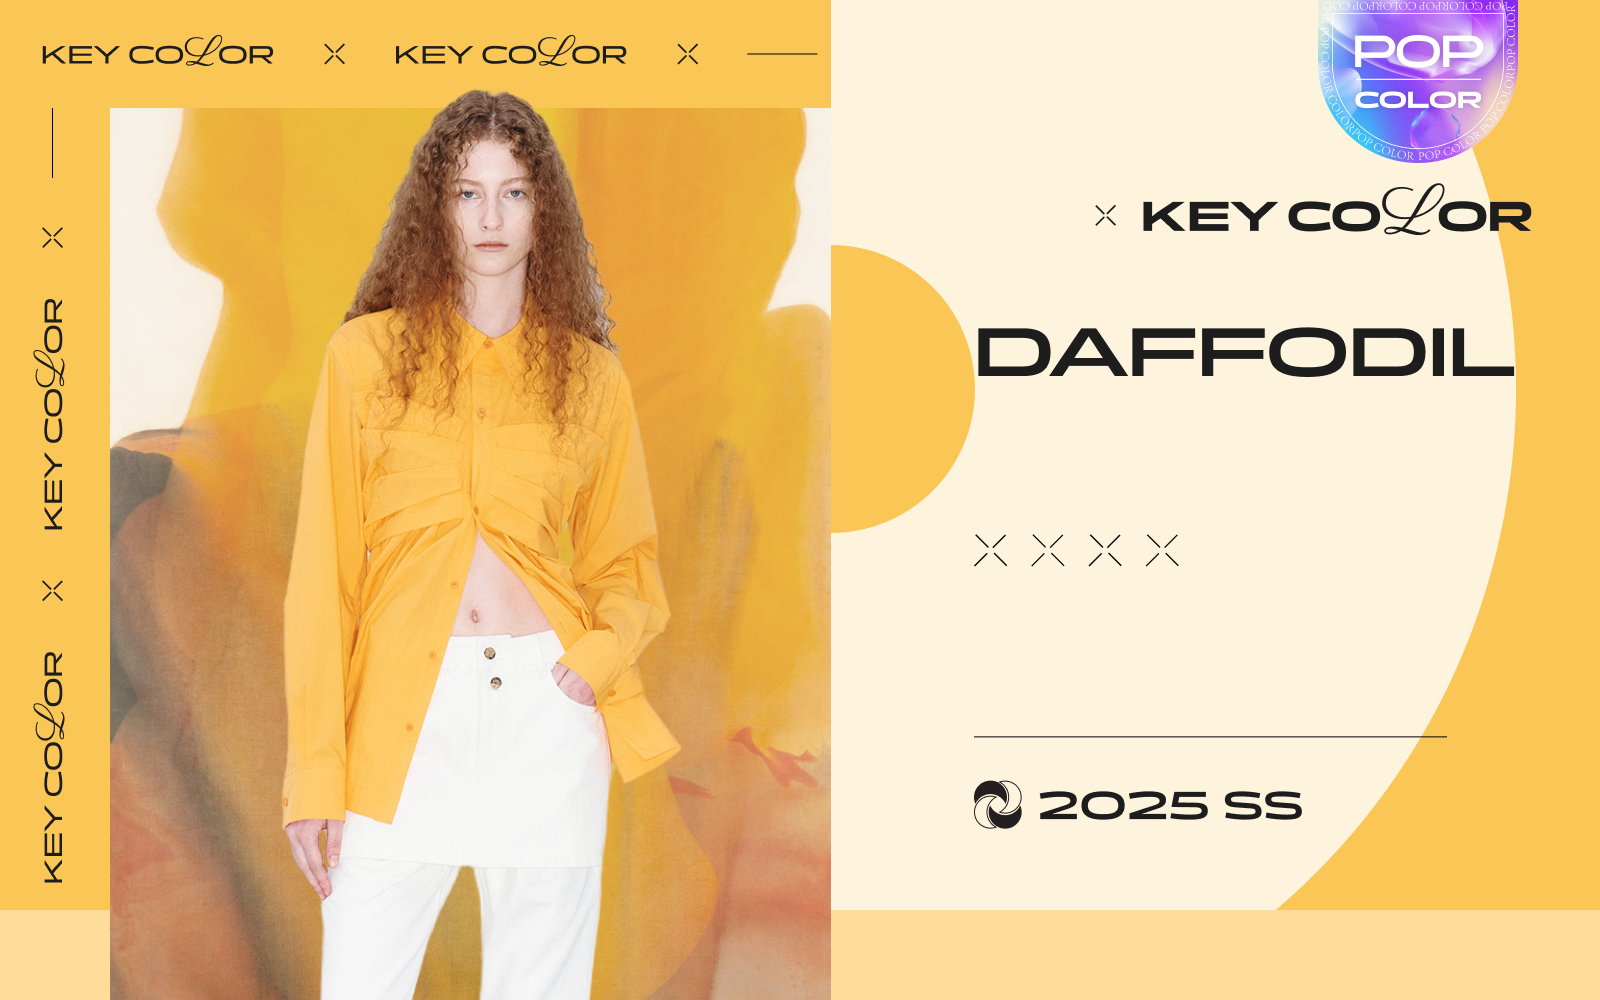 Daffodil -- The Color Trend for Womenswear